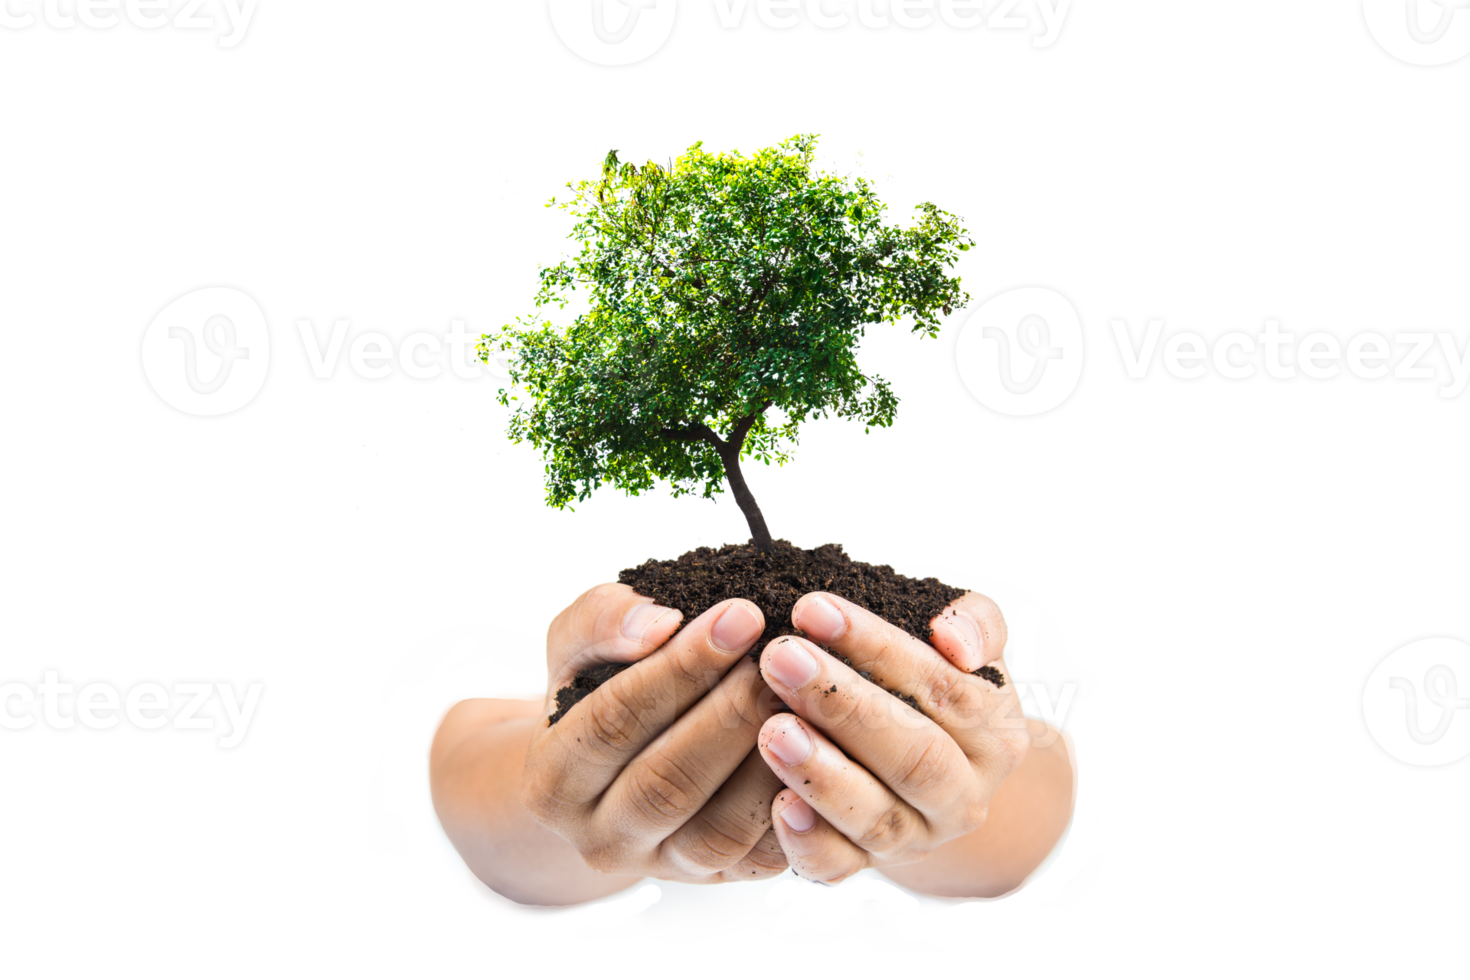 Hands holding a green young plant,small tree isolate background png